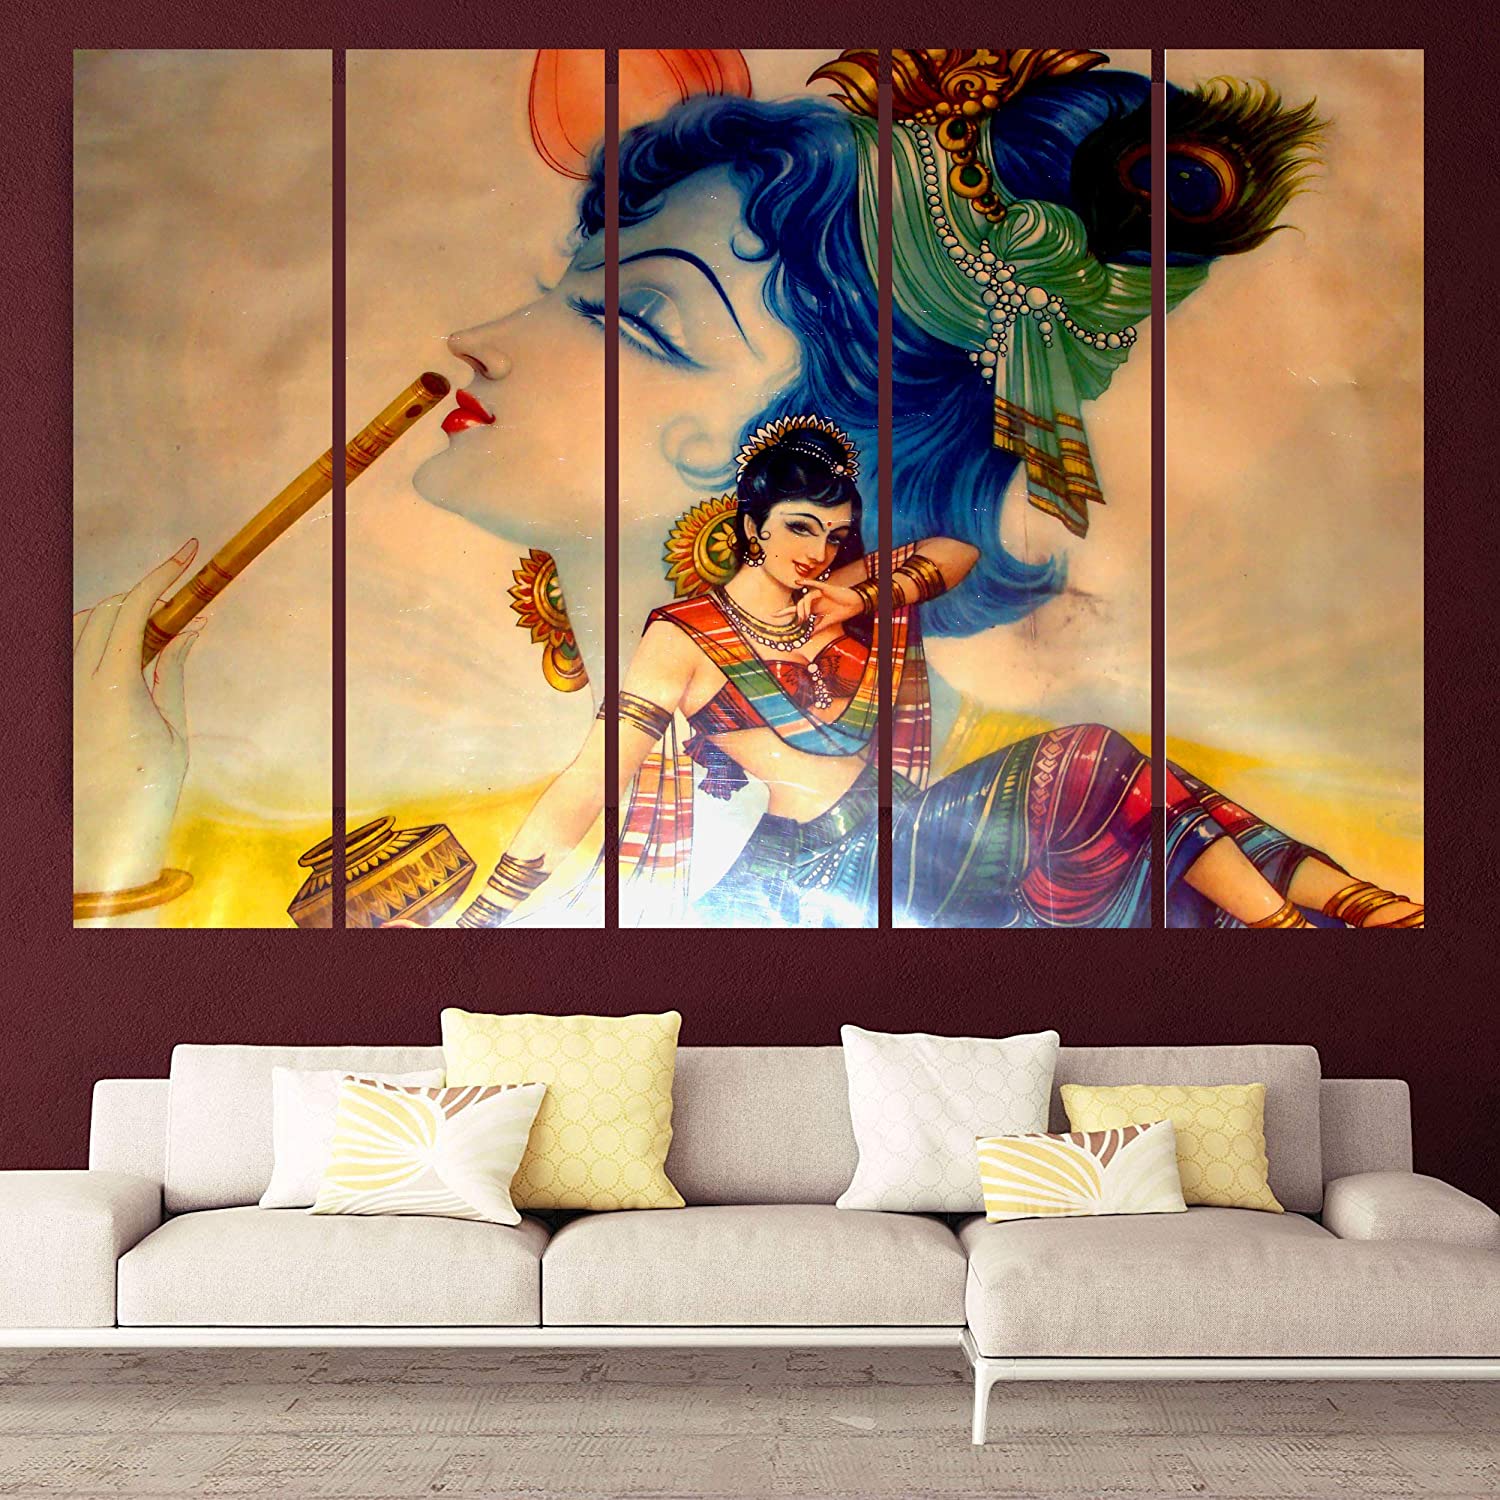 Glossy Acrylic Cartoon Wall Painting, For Home Decor at Rs 150/square feet  in Delhi